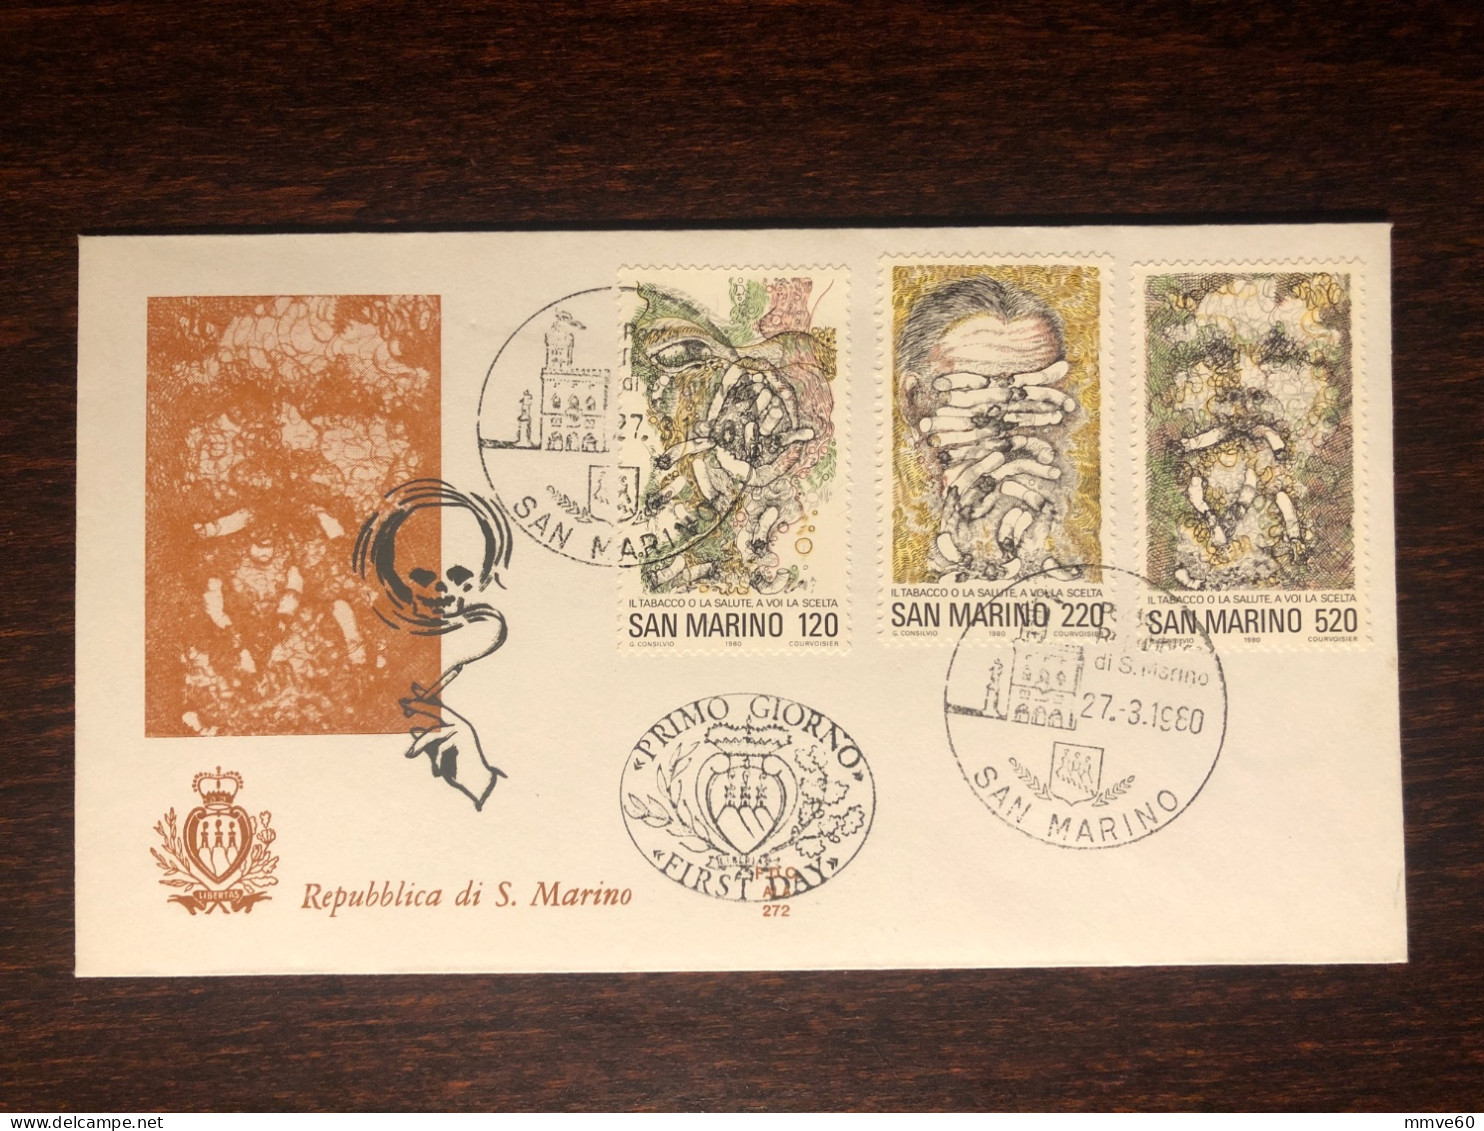 SAN MARINO FDC COVER 1980 YEAR SMOKING TOBACCO HEALTH MEDICINE STAMPS - FDC